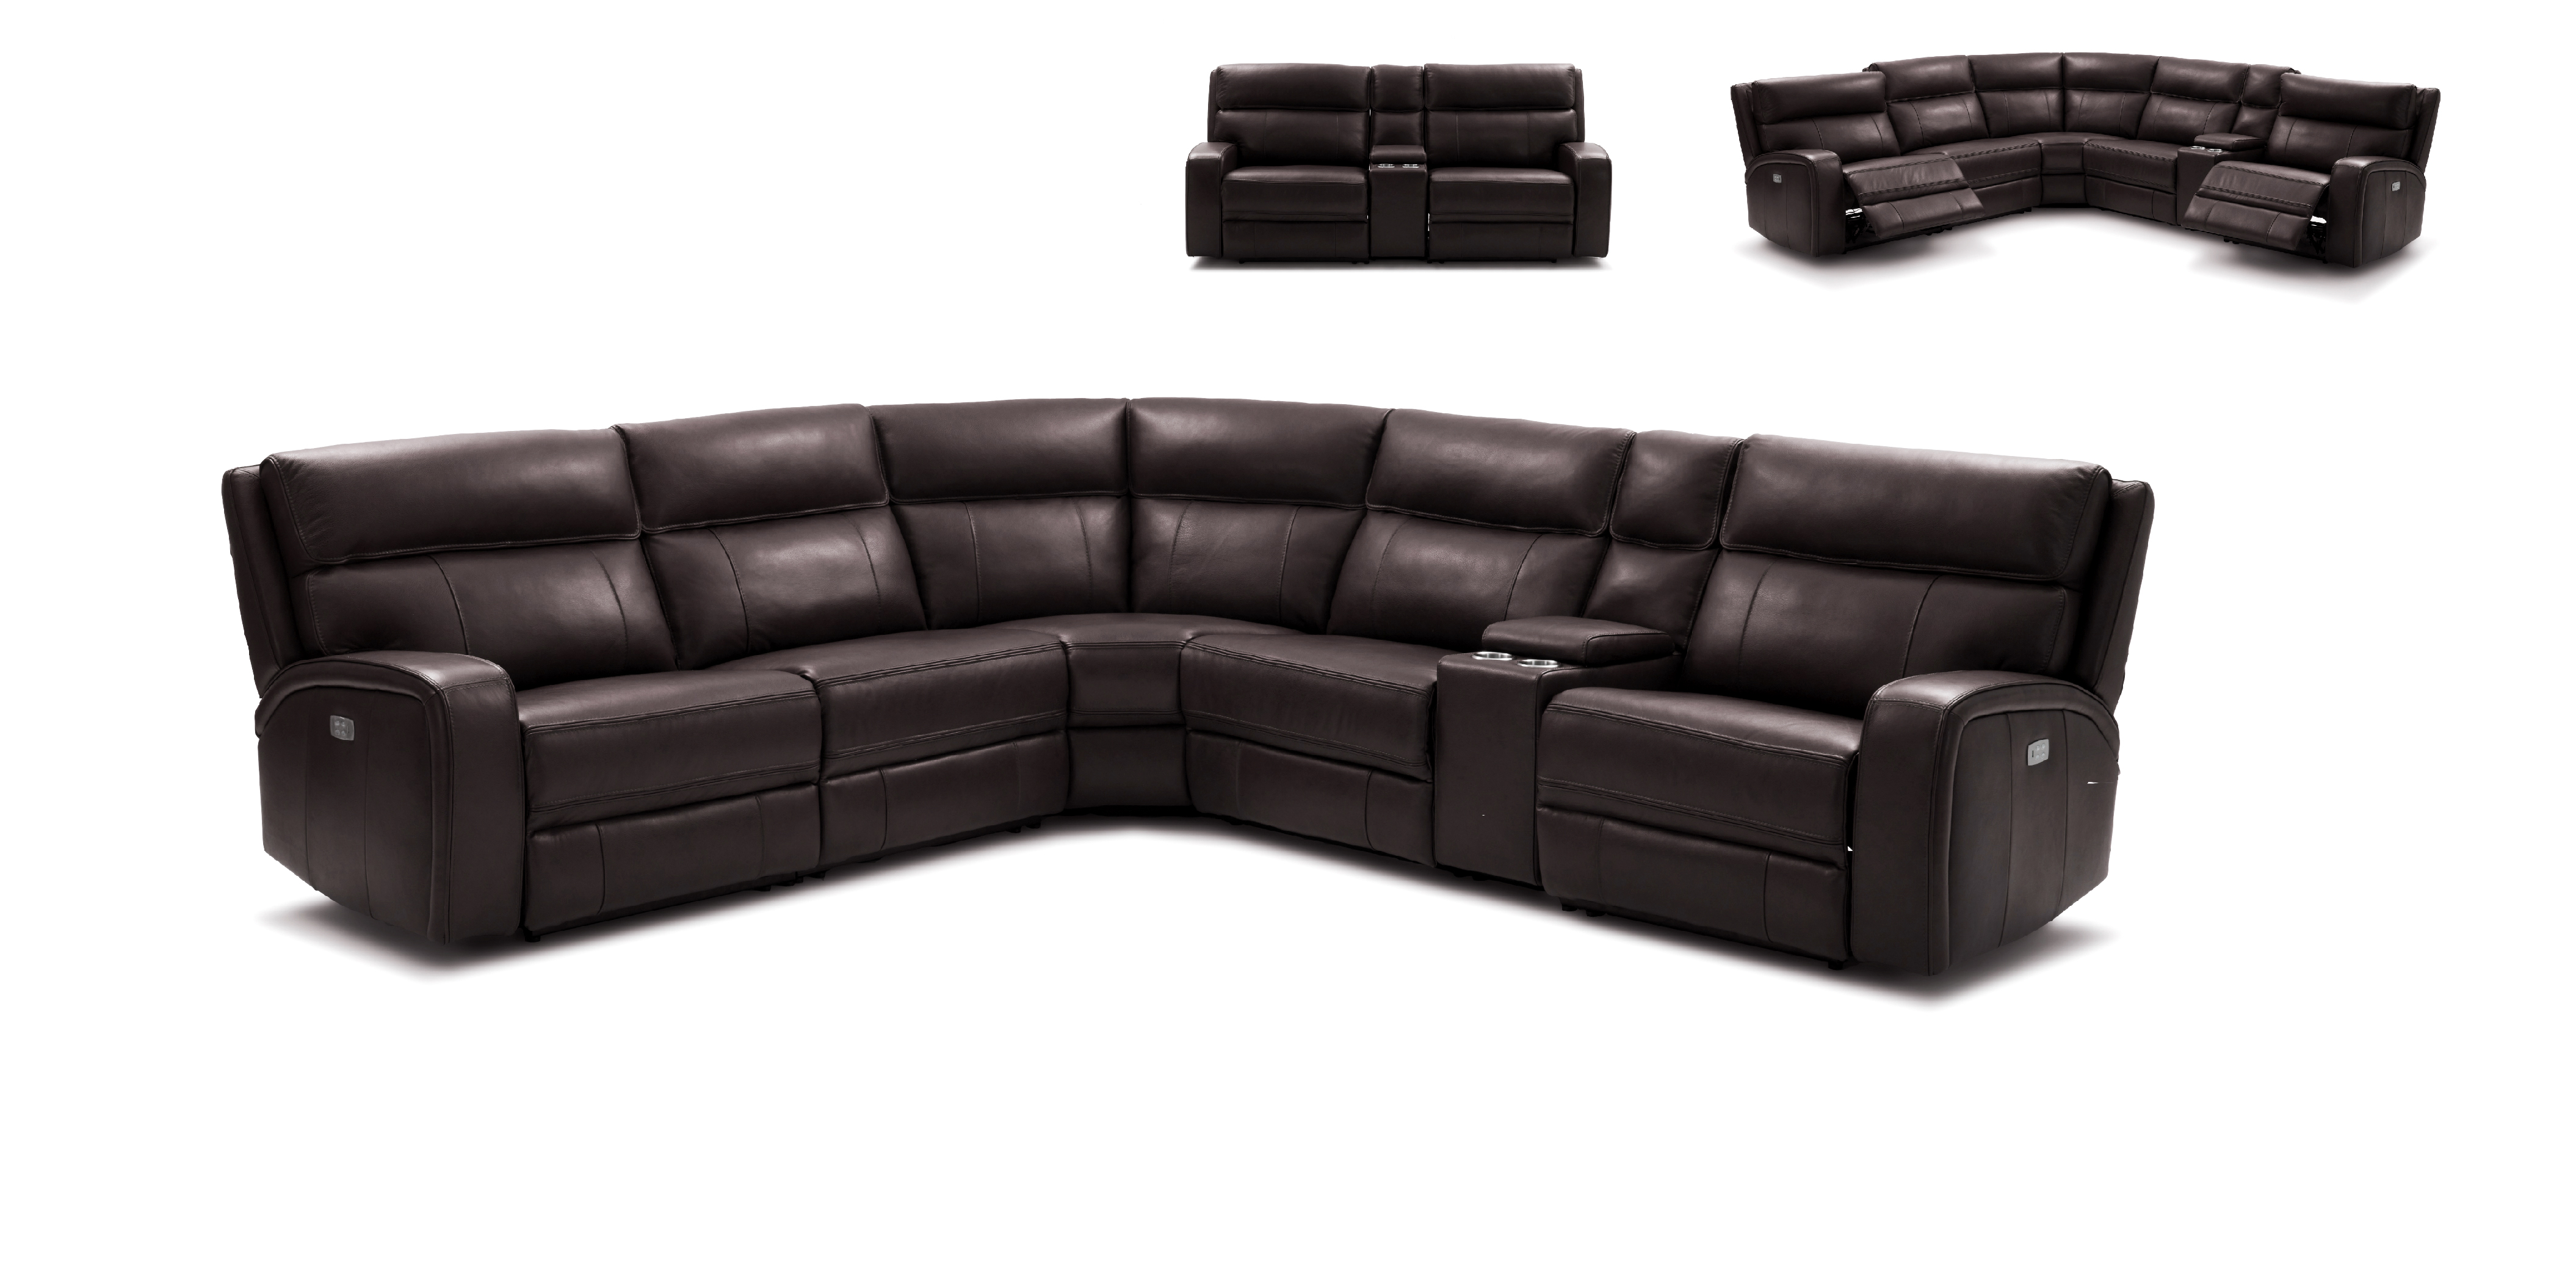 High-Class Furniture Italian Leather Upholstery - Click Image to Close